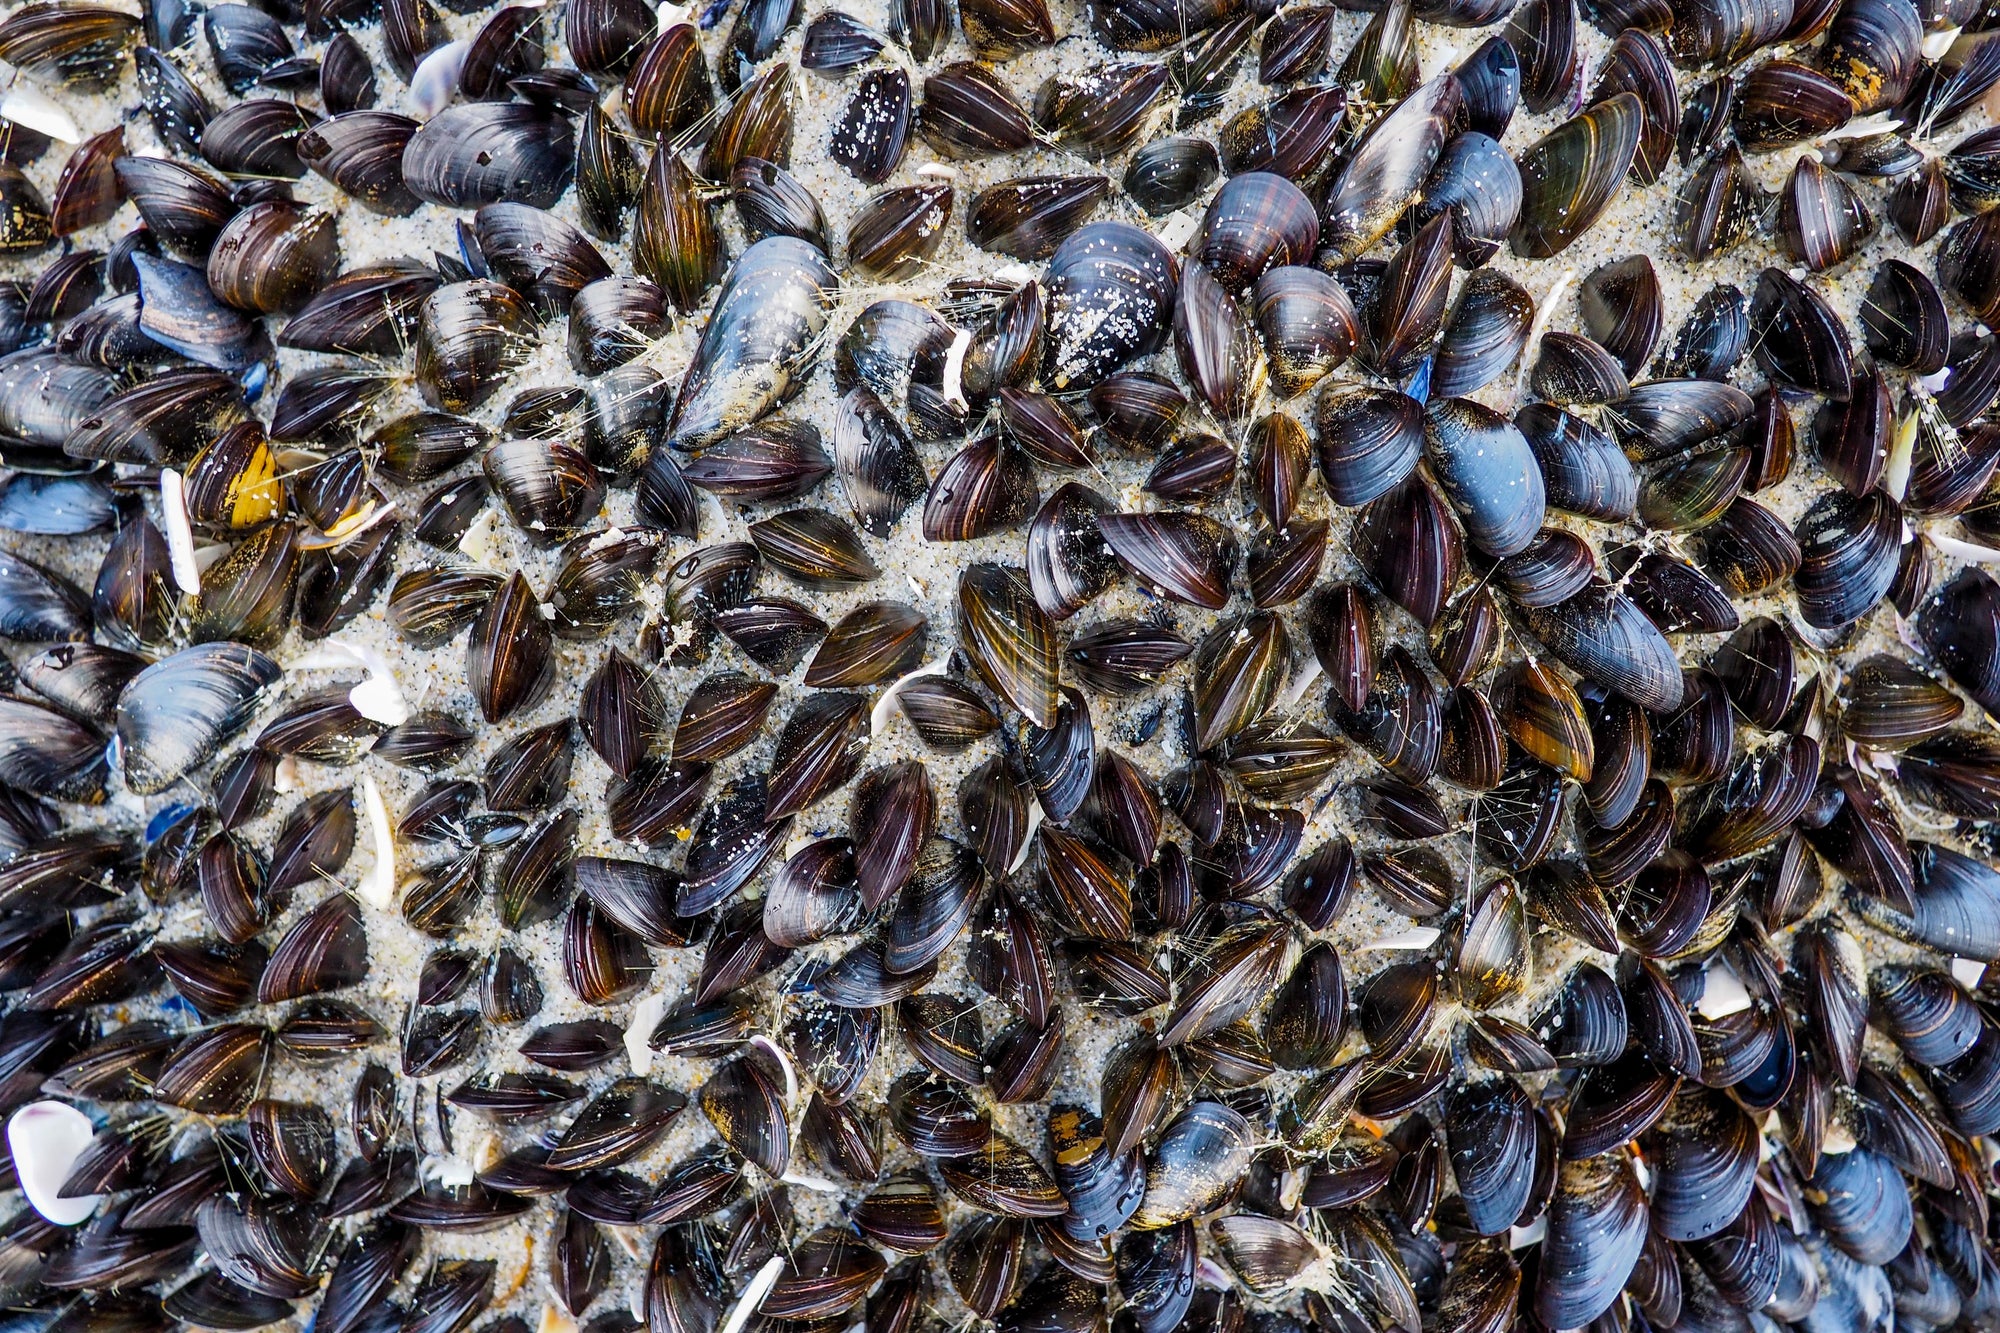 Mussels are being used to filter microplastics...